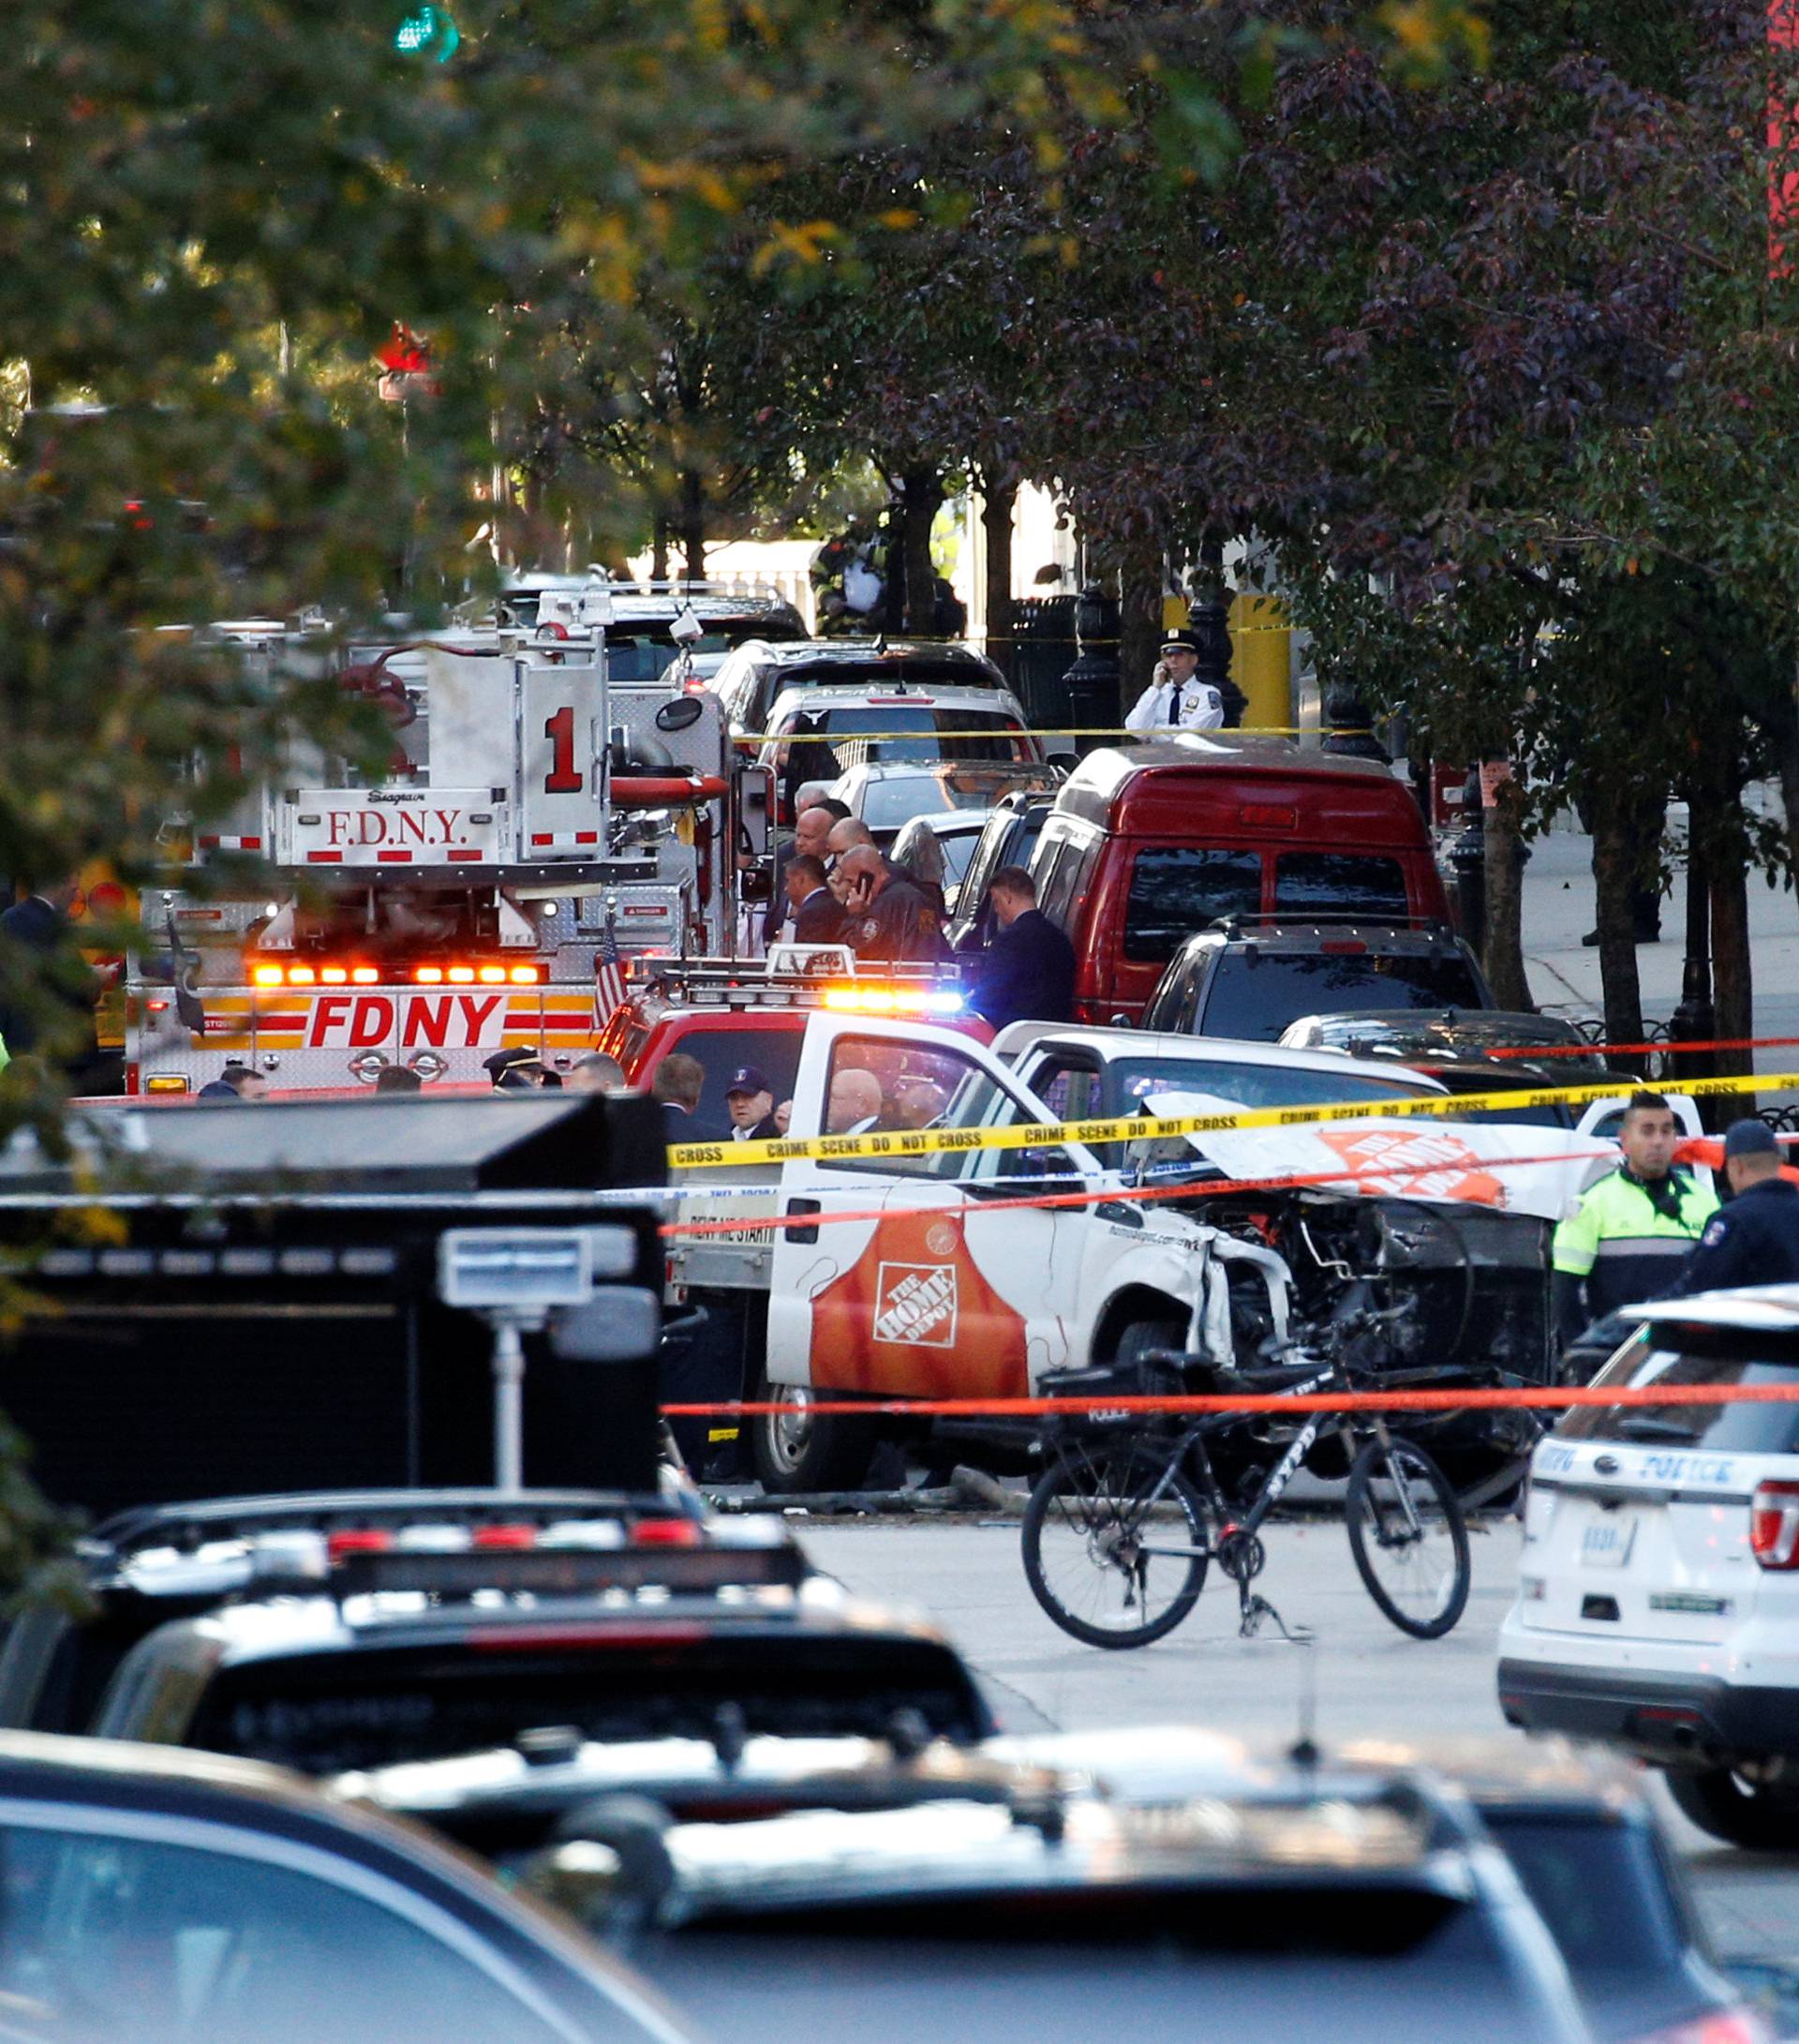 A Home Depot truck which struck down multiple people on a bike path killing several and injuring numerous others is seen in lower Manhattan in New York